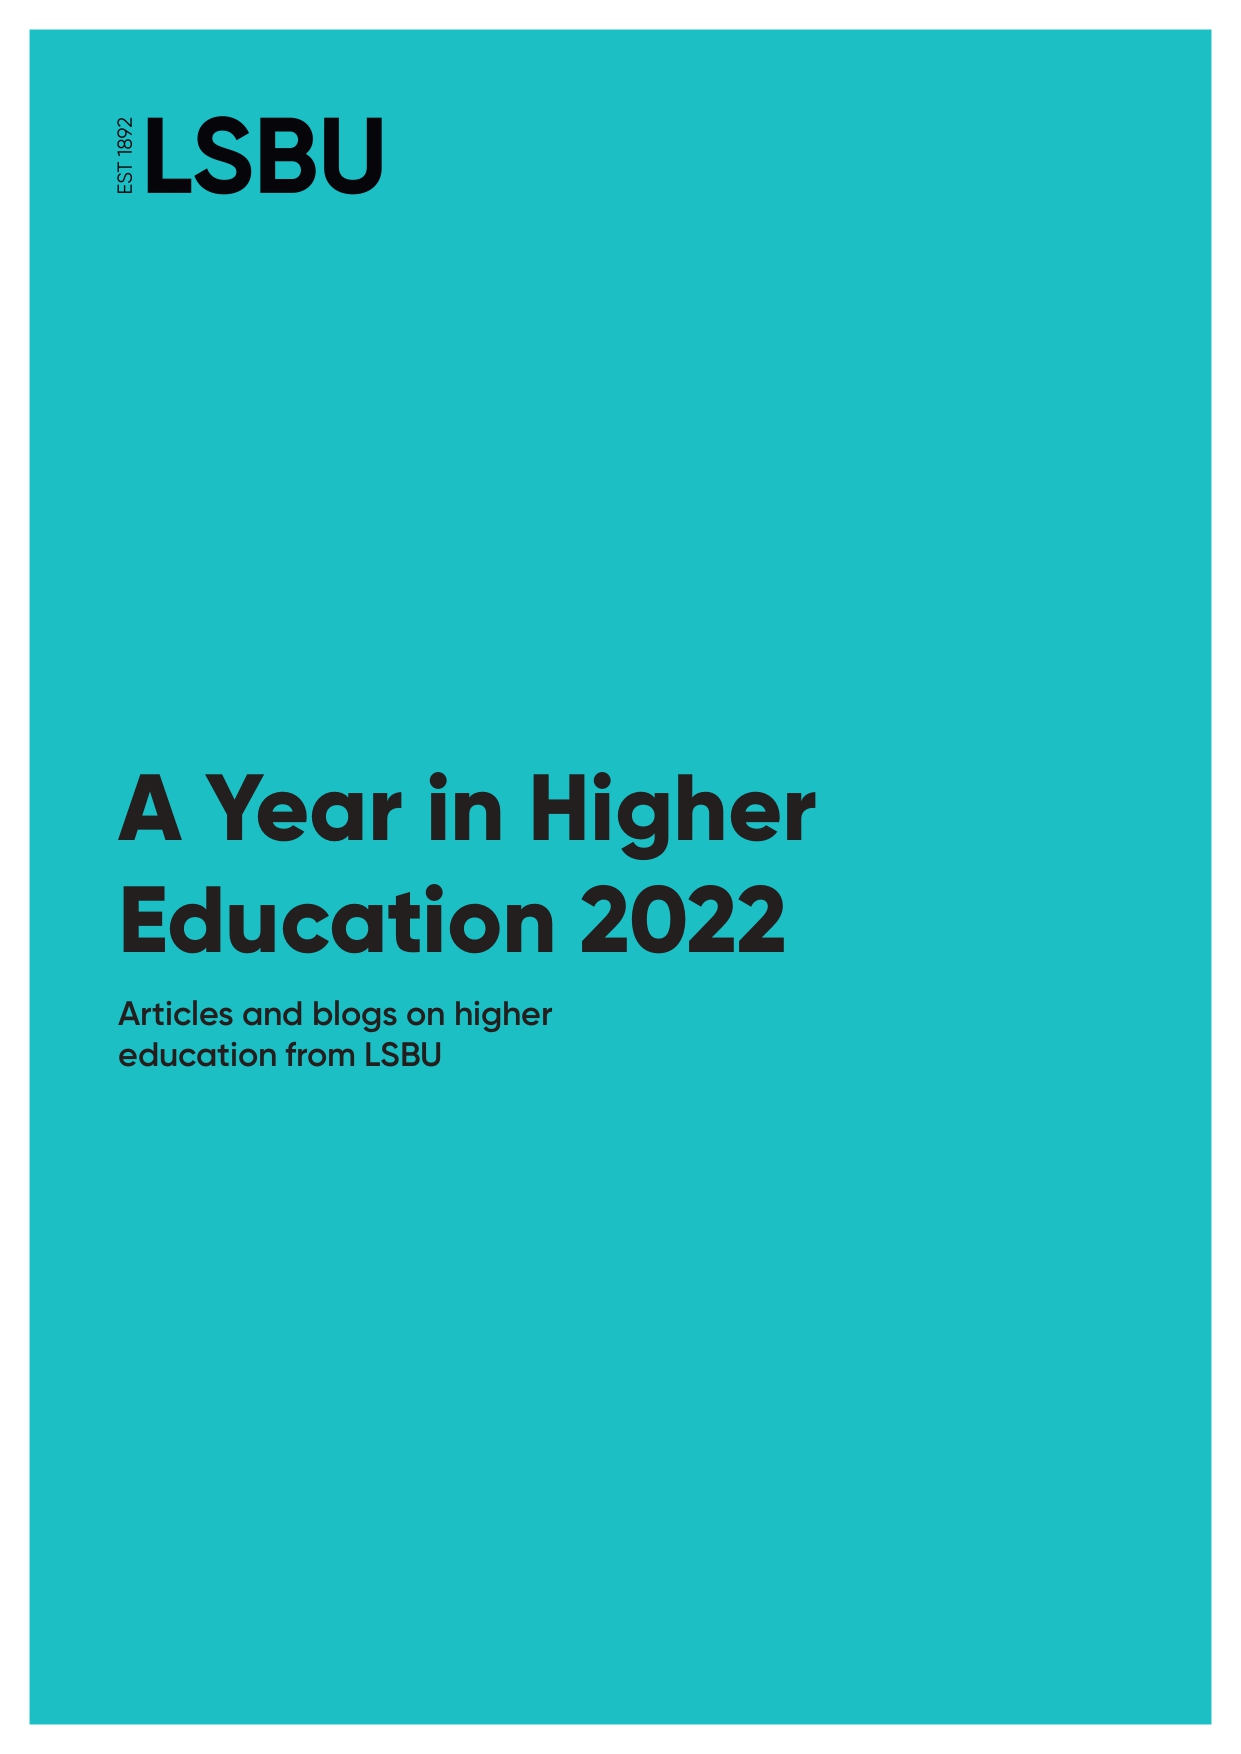 A Year in Higher Education booklet